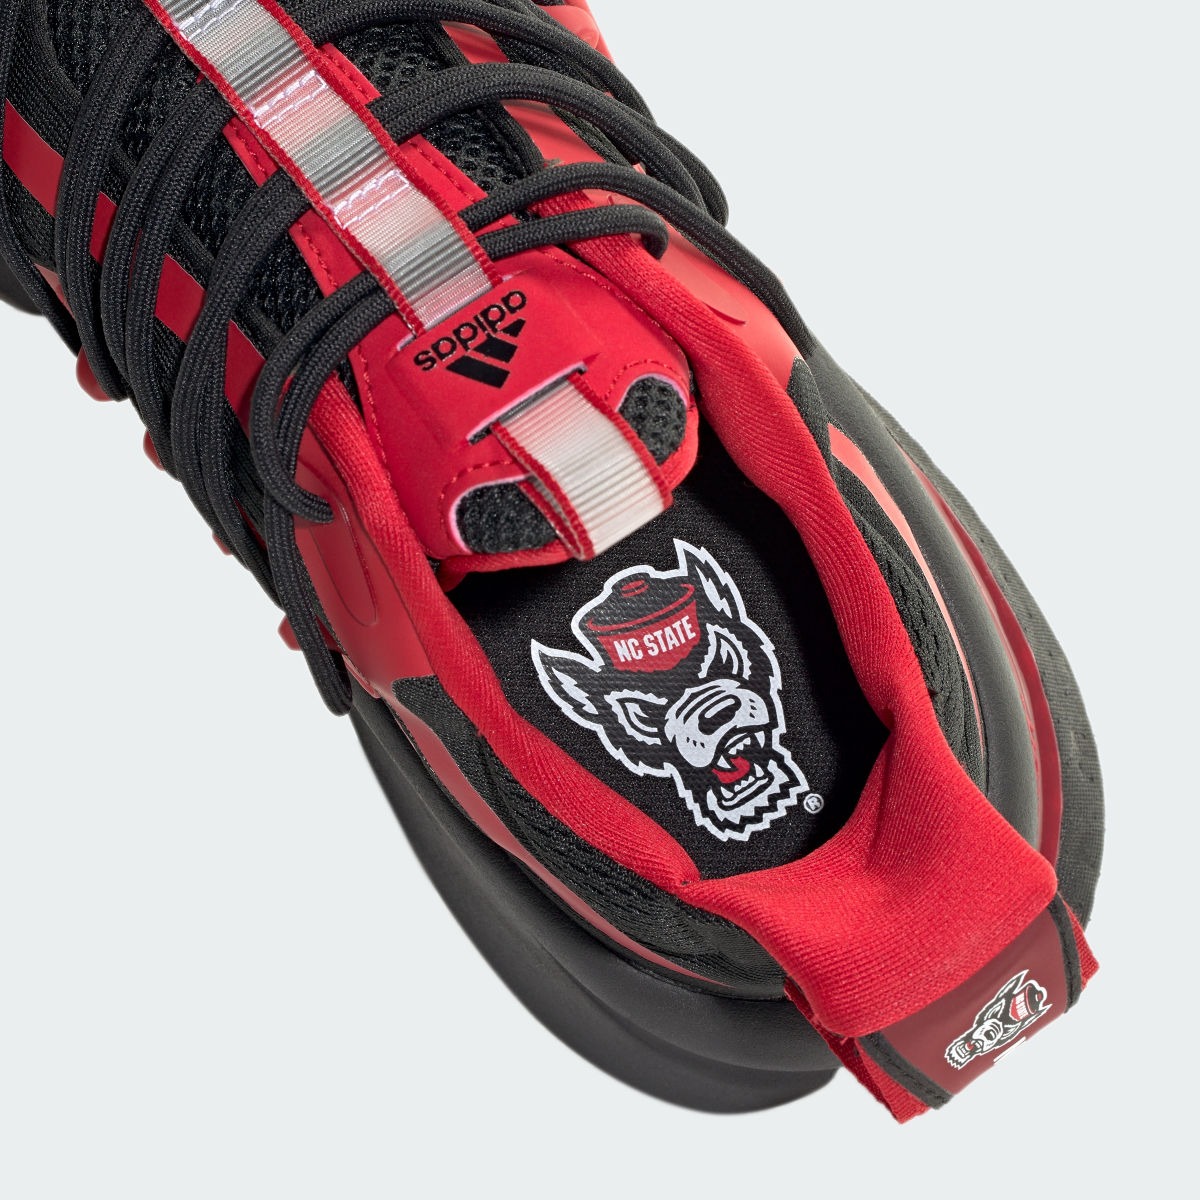 Adidas NC State Alphaboost V1 Shoes. 8